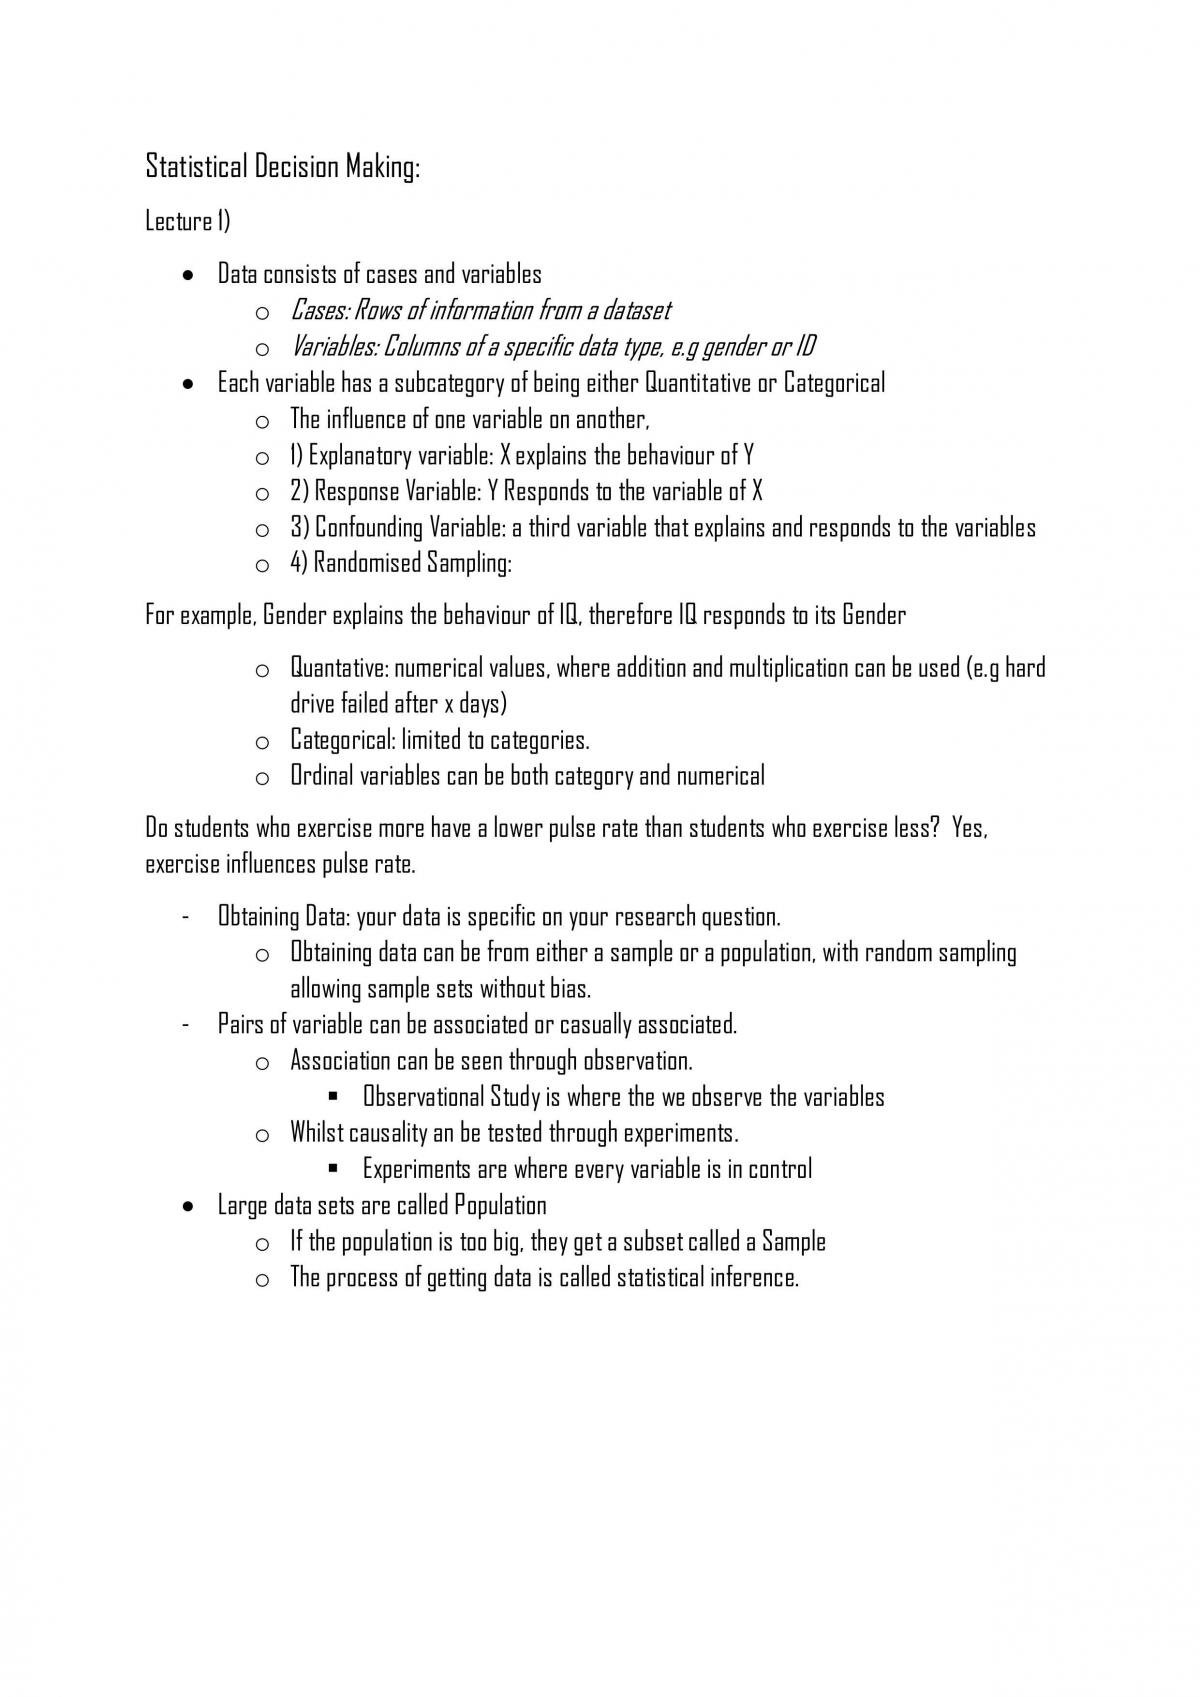 Statistical Decision Making Whole Notes - Page 1